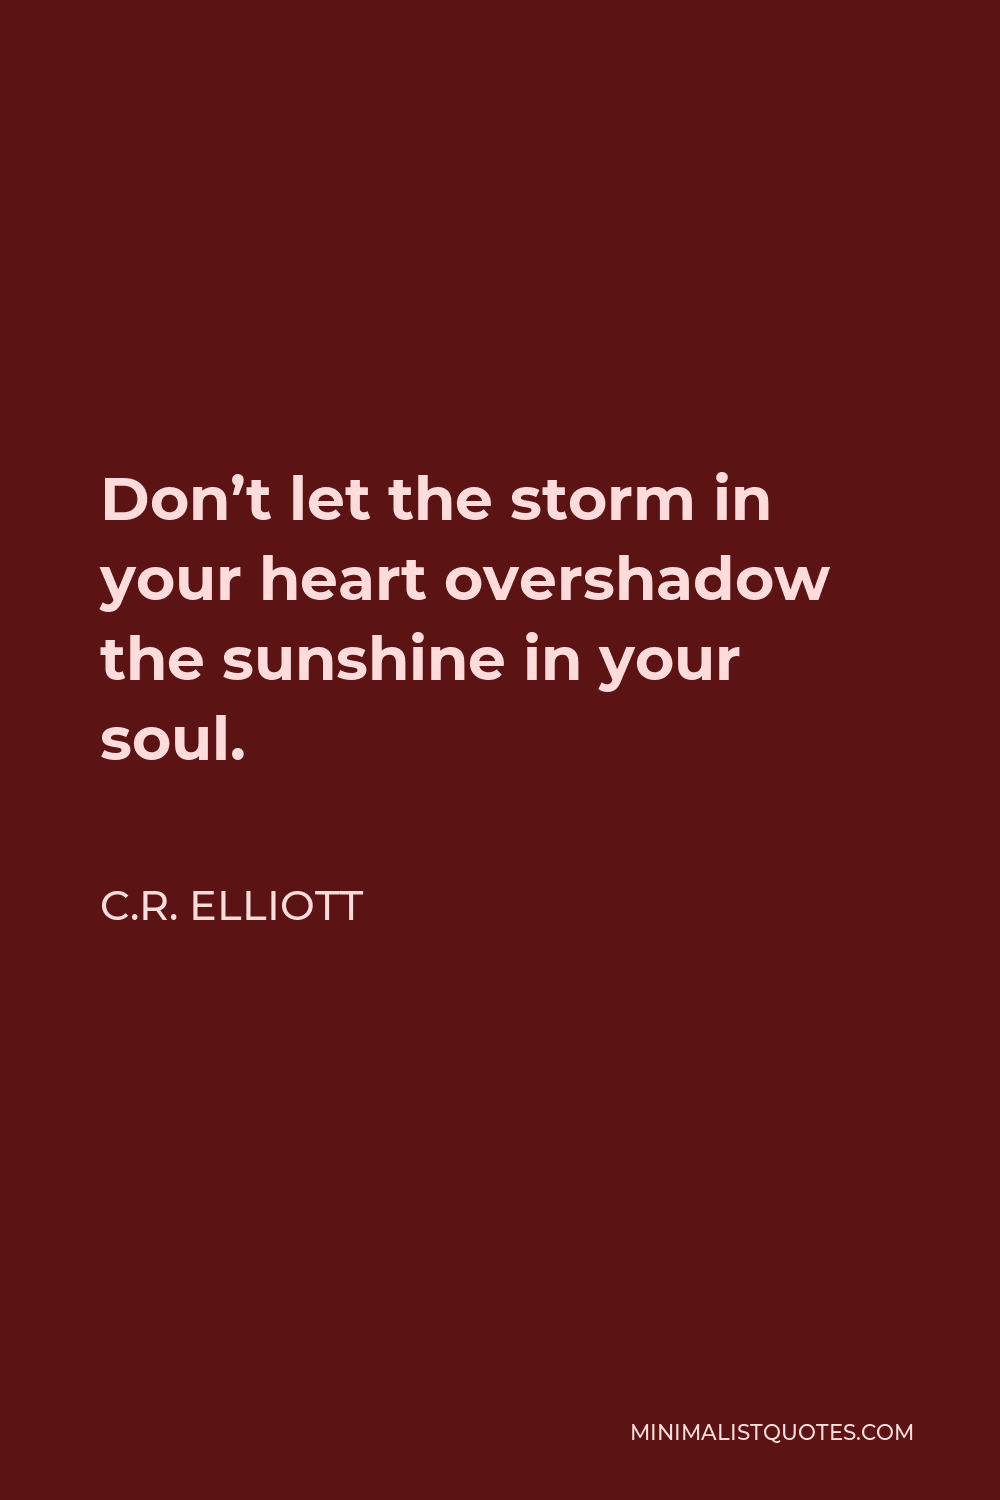 C.R. Elliott Quote - Don’t let the storm in your heart overshadow the sunshine in your soul.